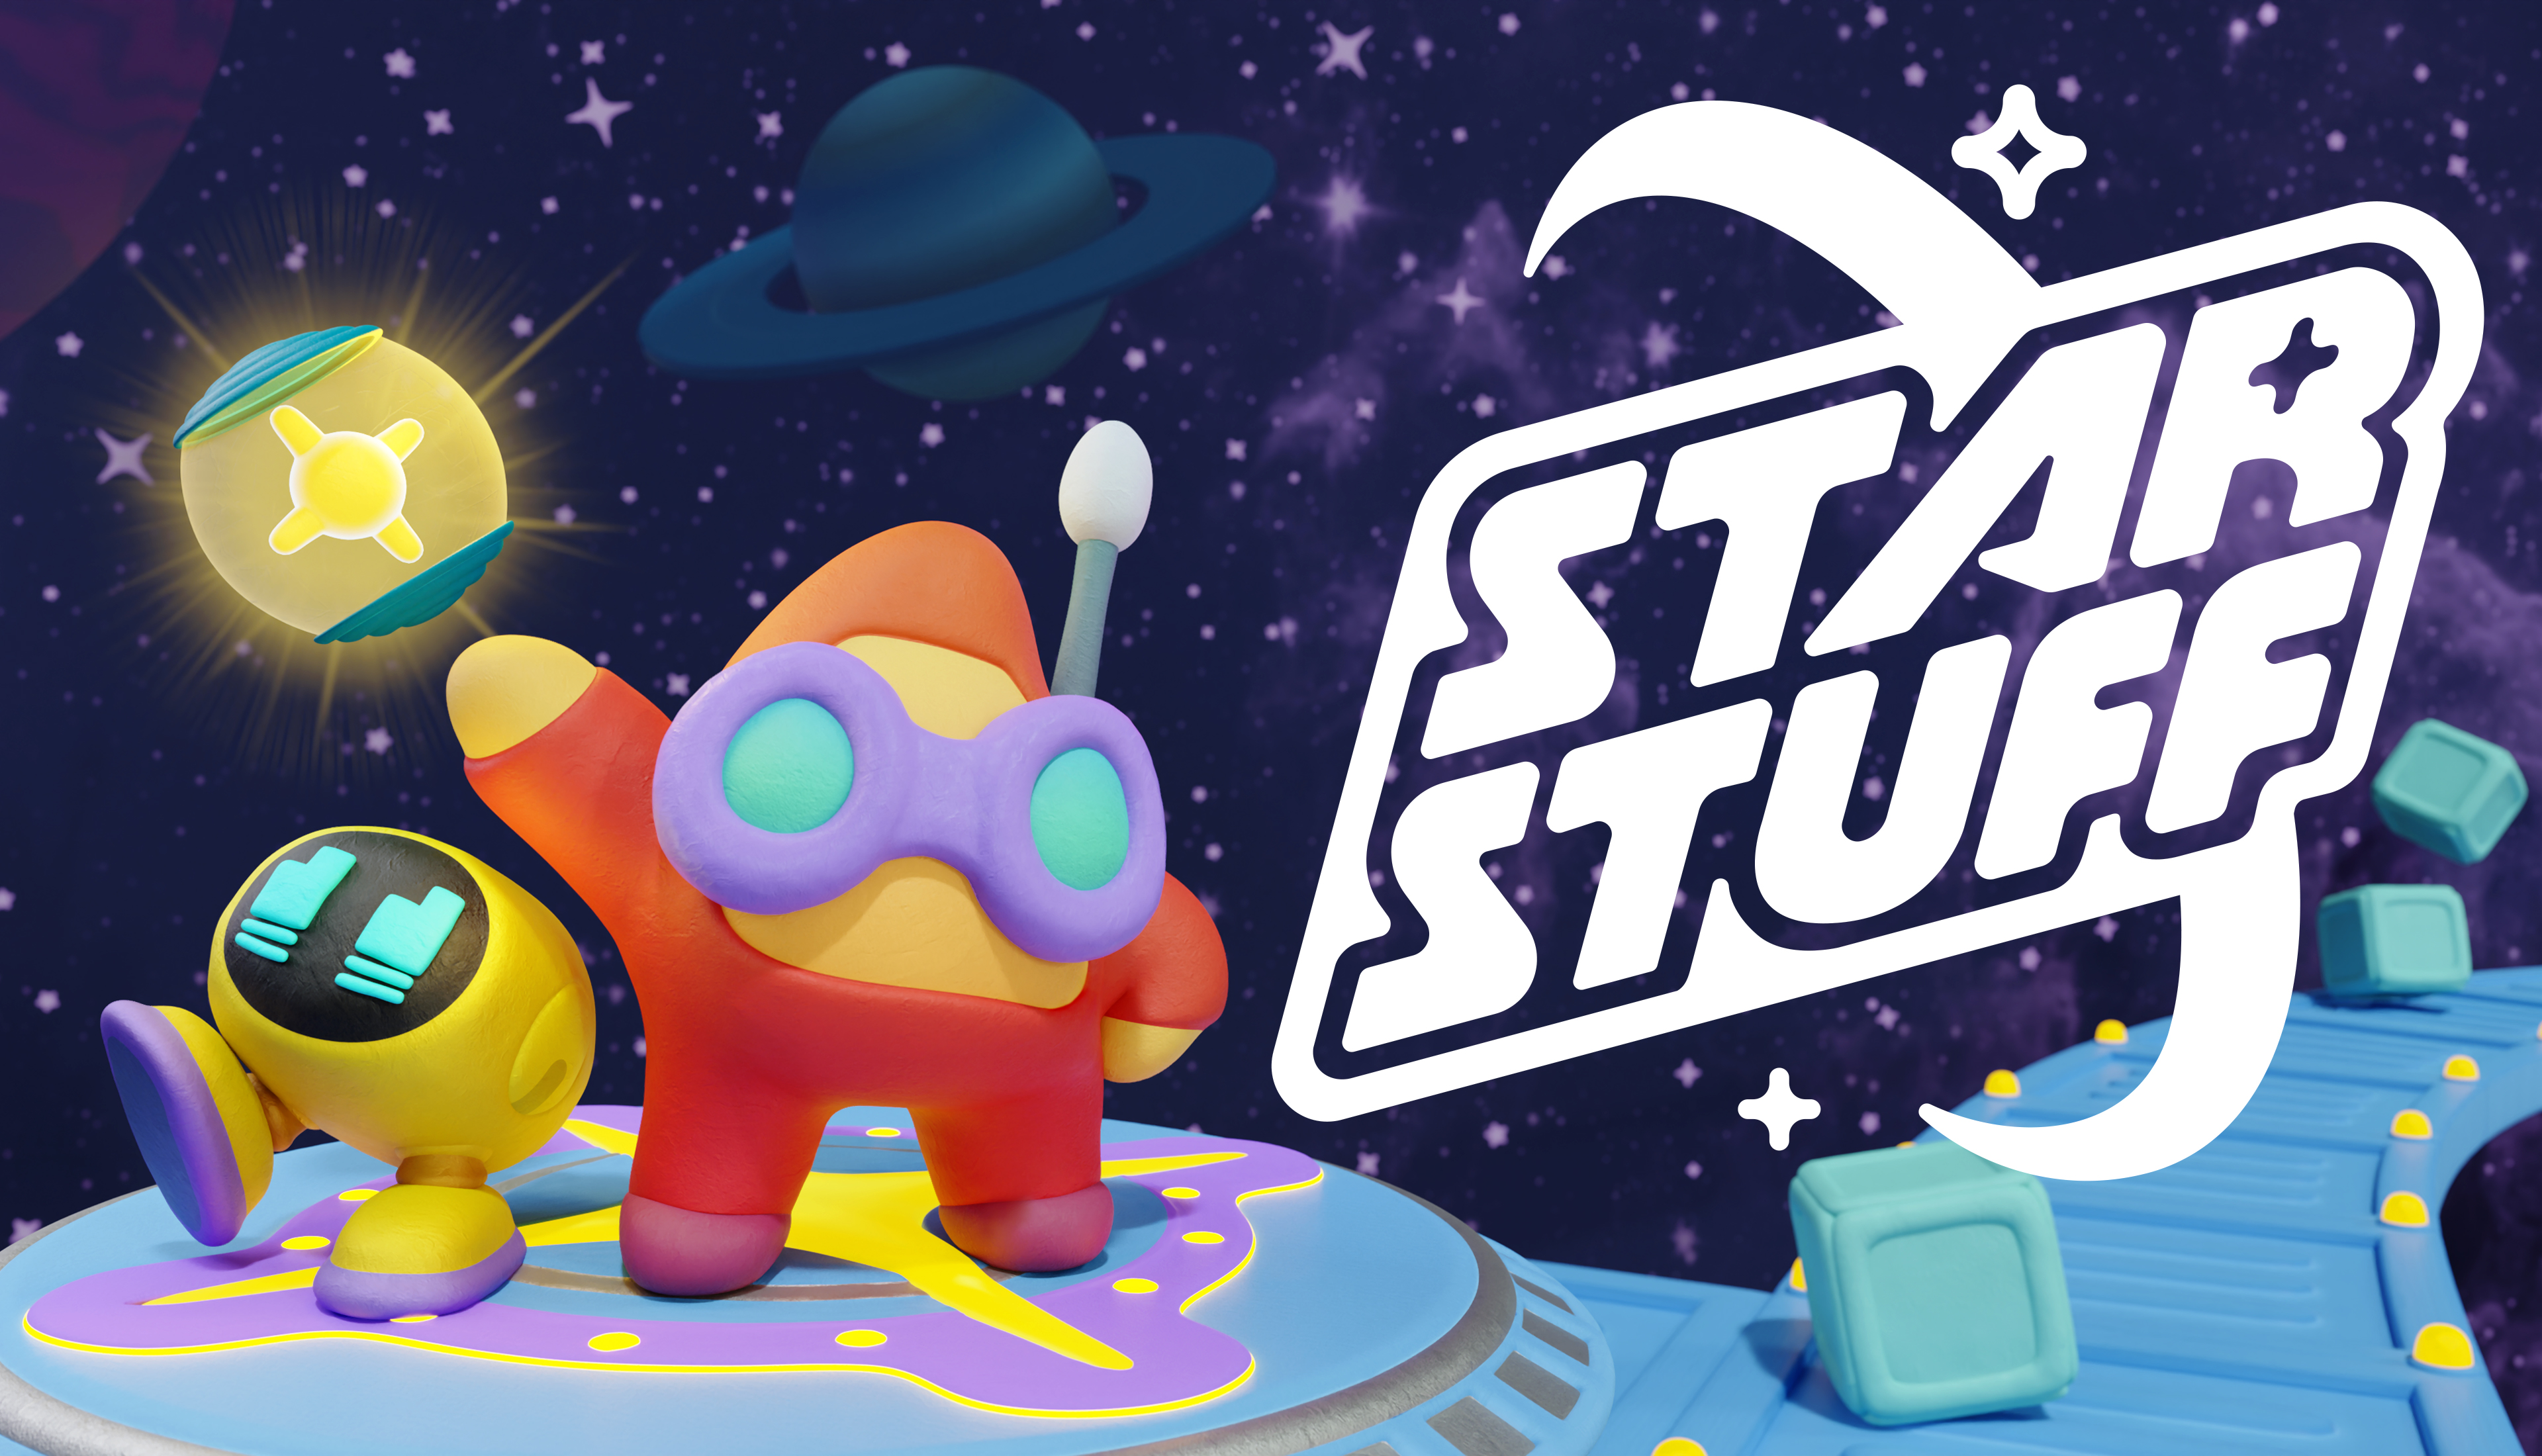 A rectangular promotional image for Star Stuff featuring a Red Star character from the game with its yellow robotic companion standing on a space platform with ringed planets in the background